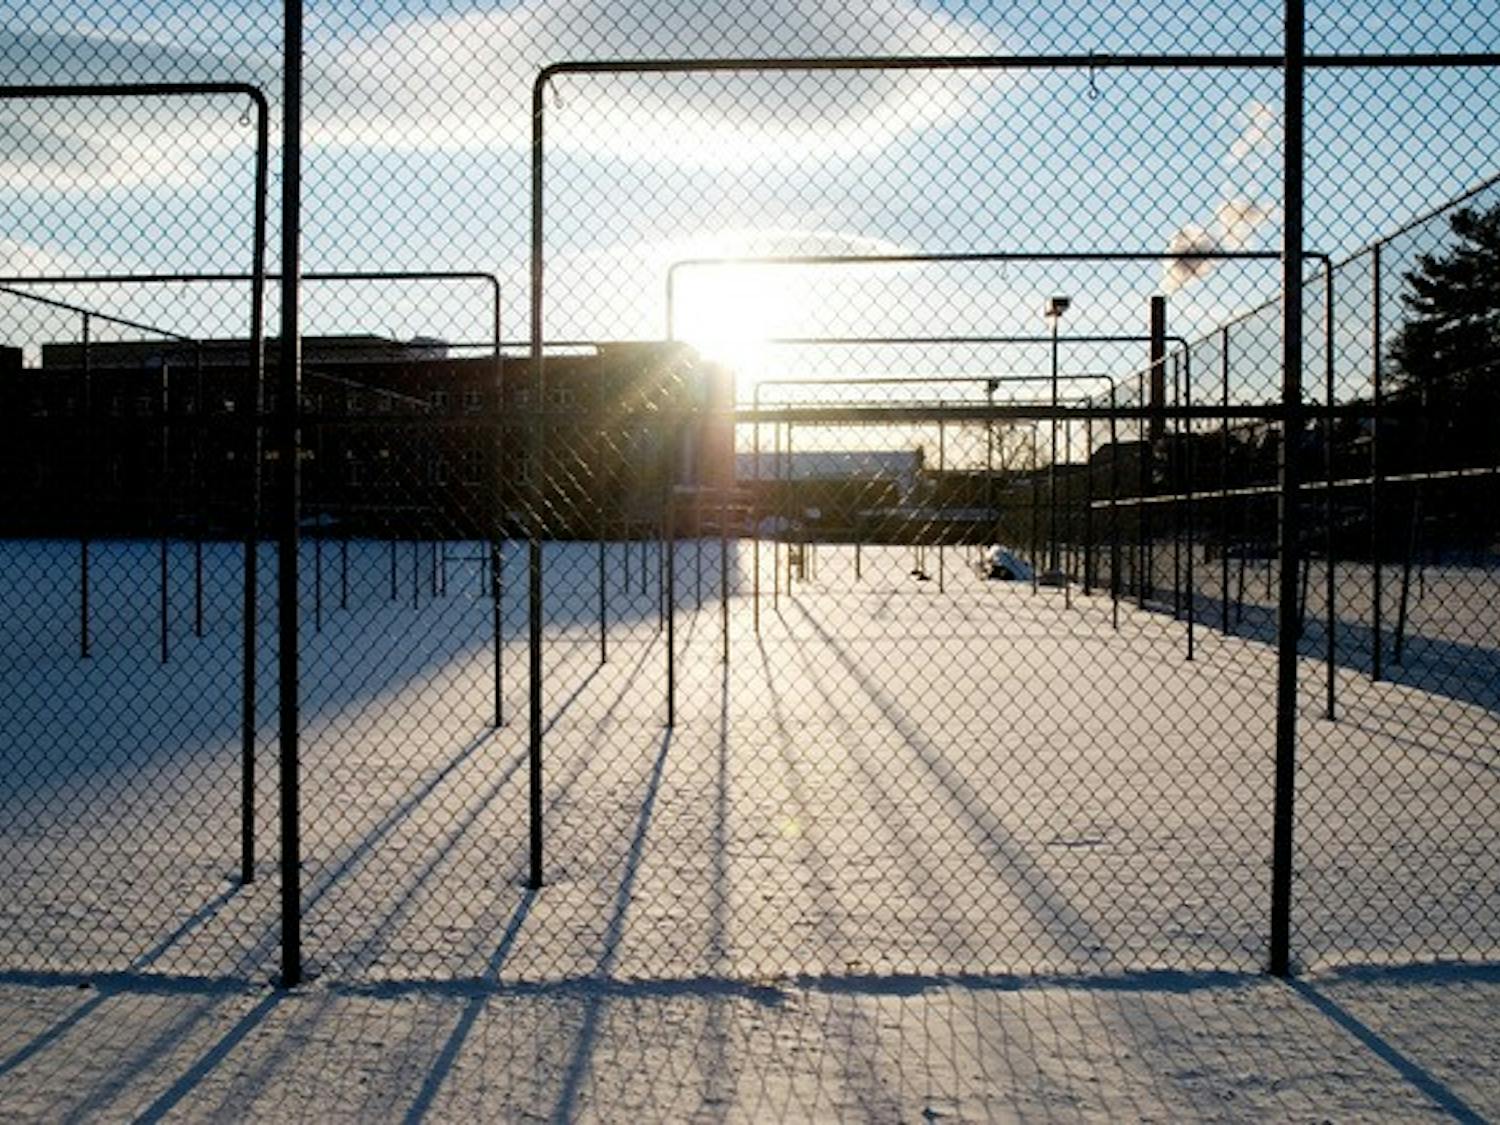 Until late last week, the Big Green's outdoor courts were blanketed in snow.